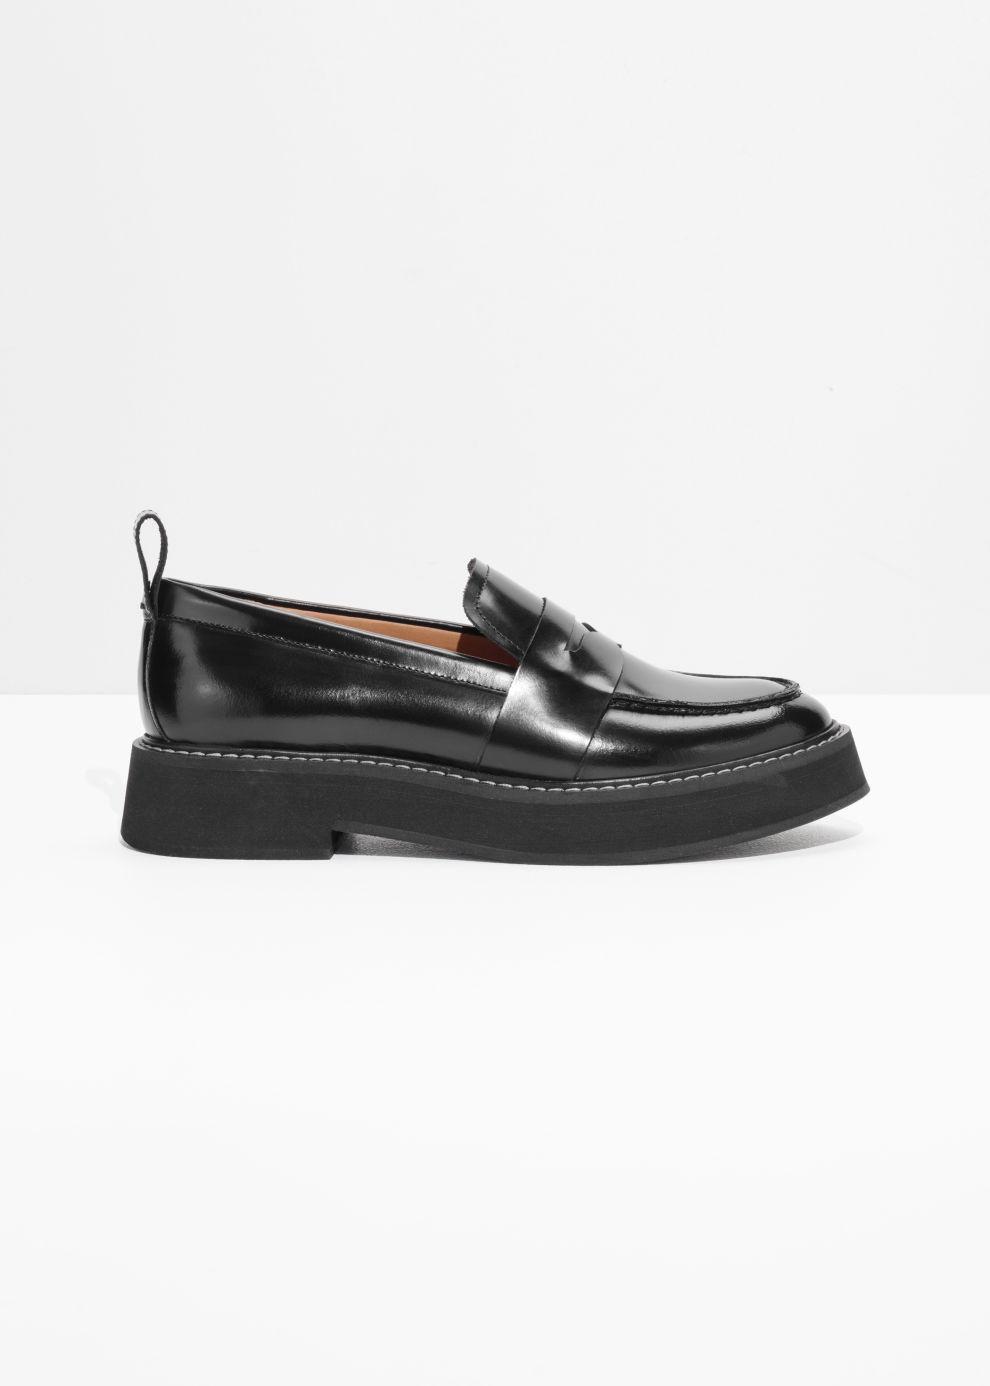 & Other Stories Leather Chunky Loafers in Black - Lyst